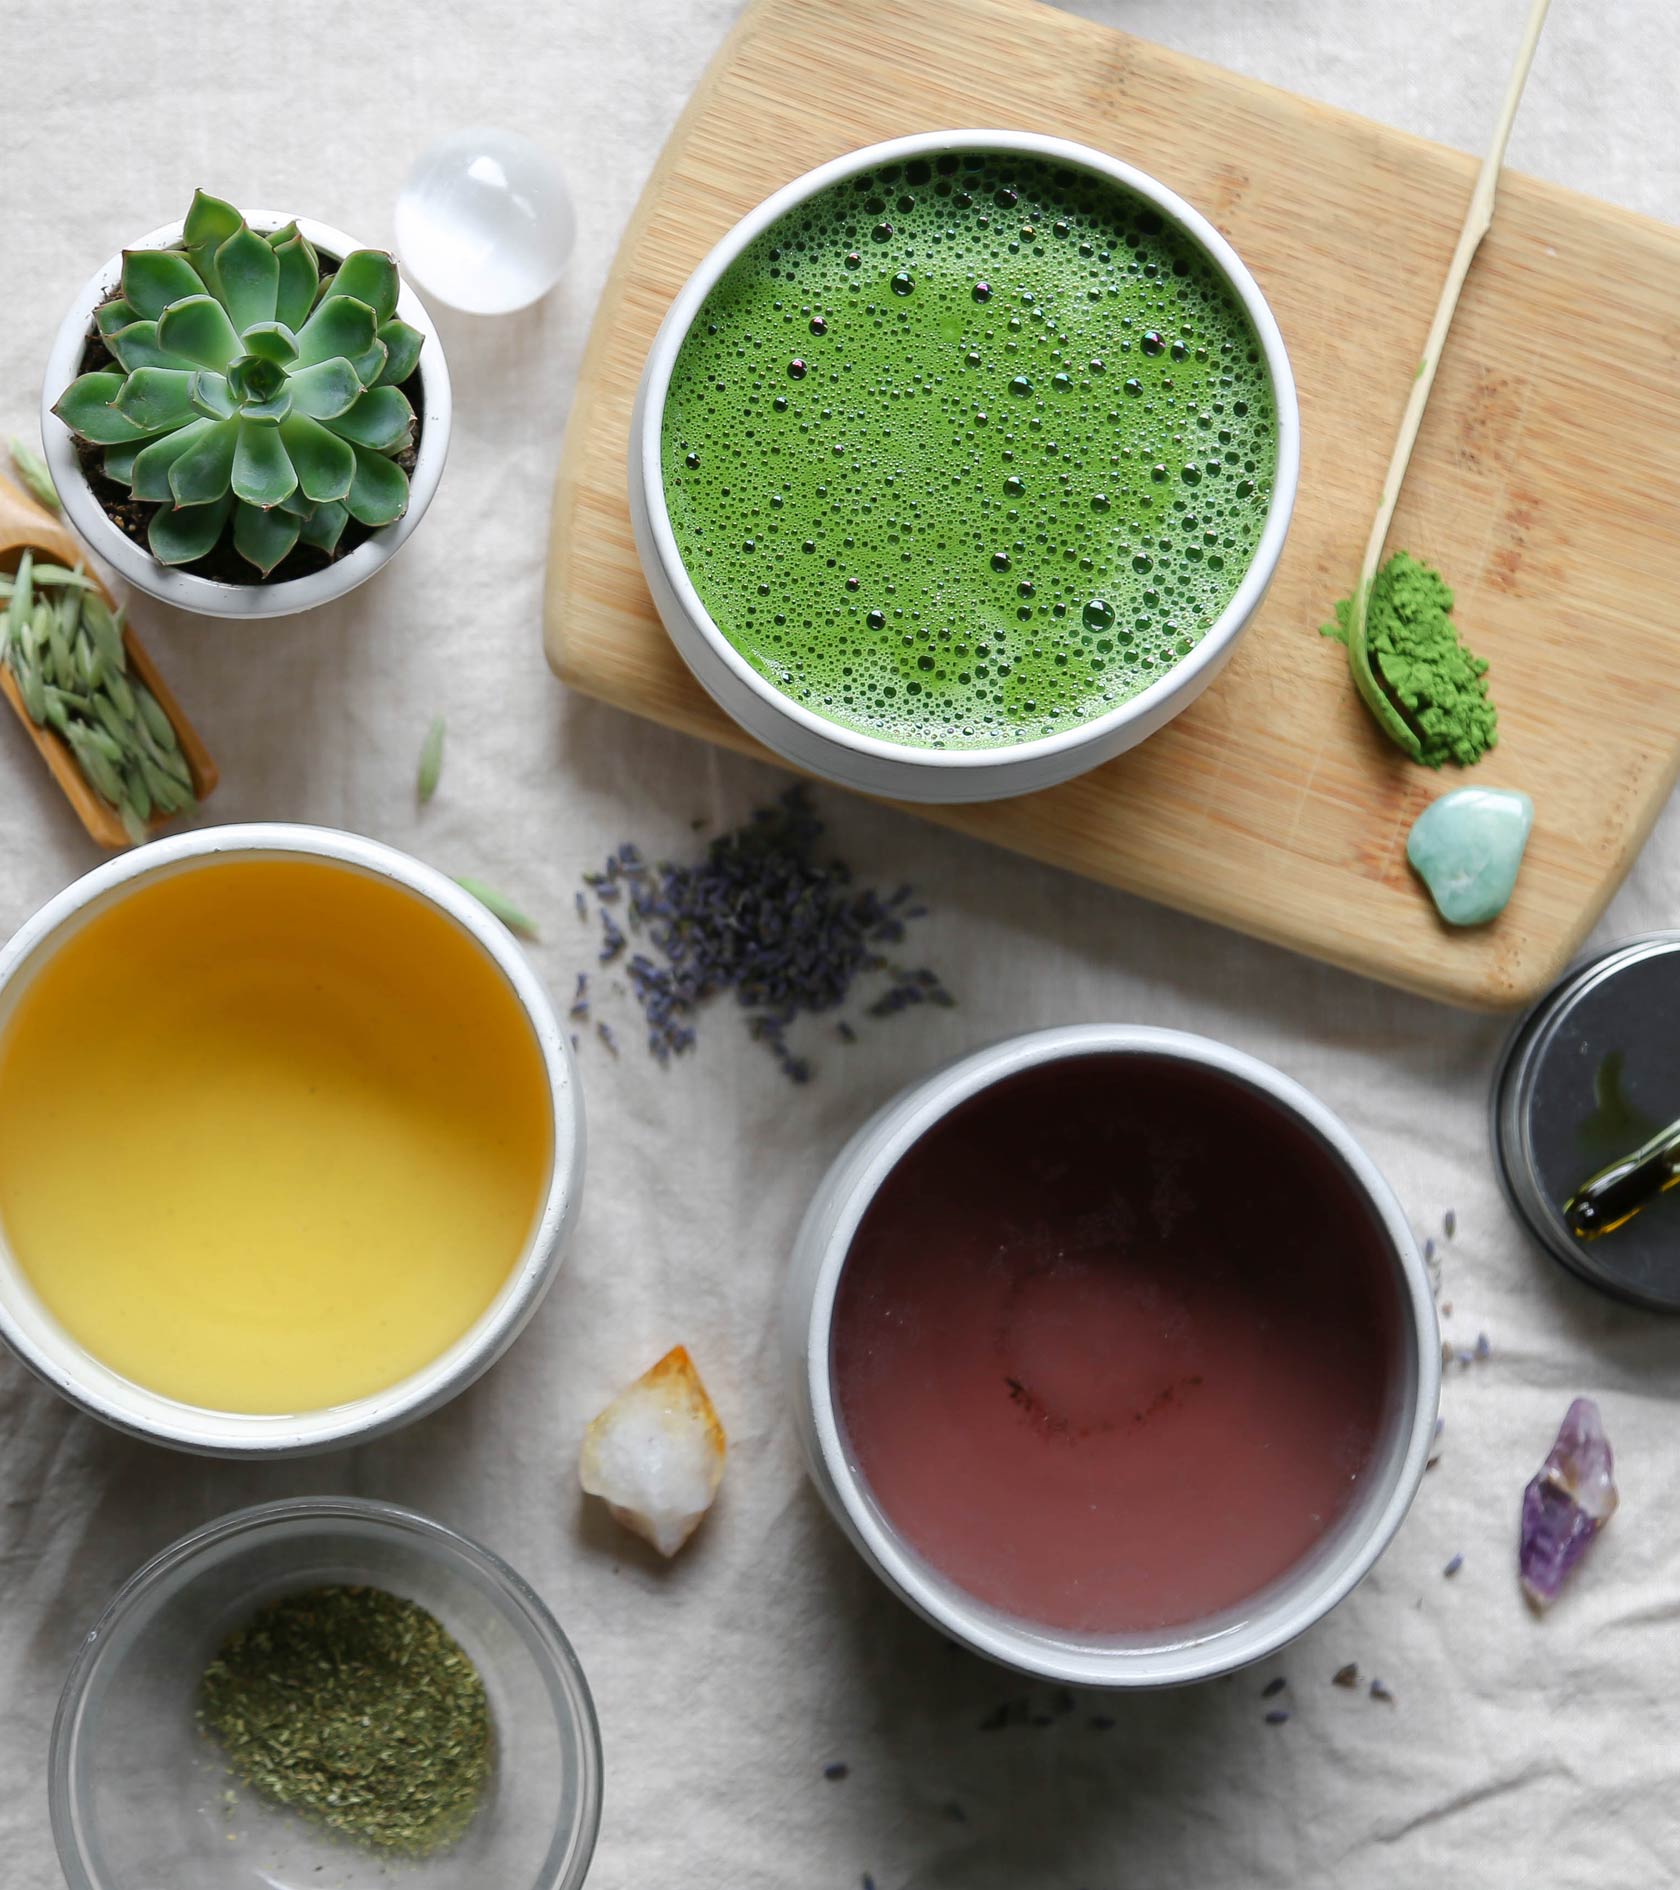 Calming Plant Remedies to Pair With Matcha